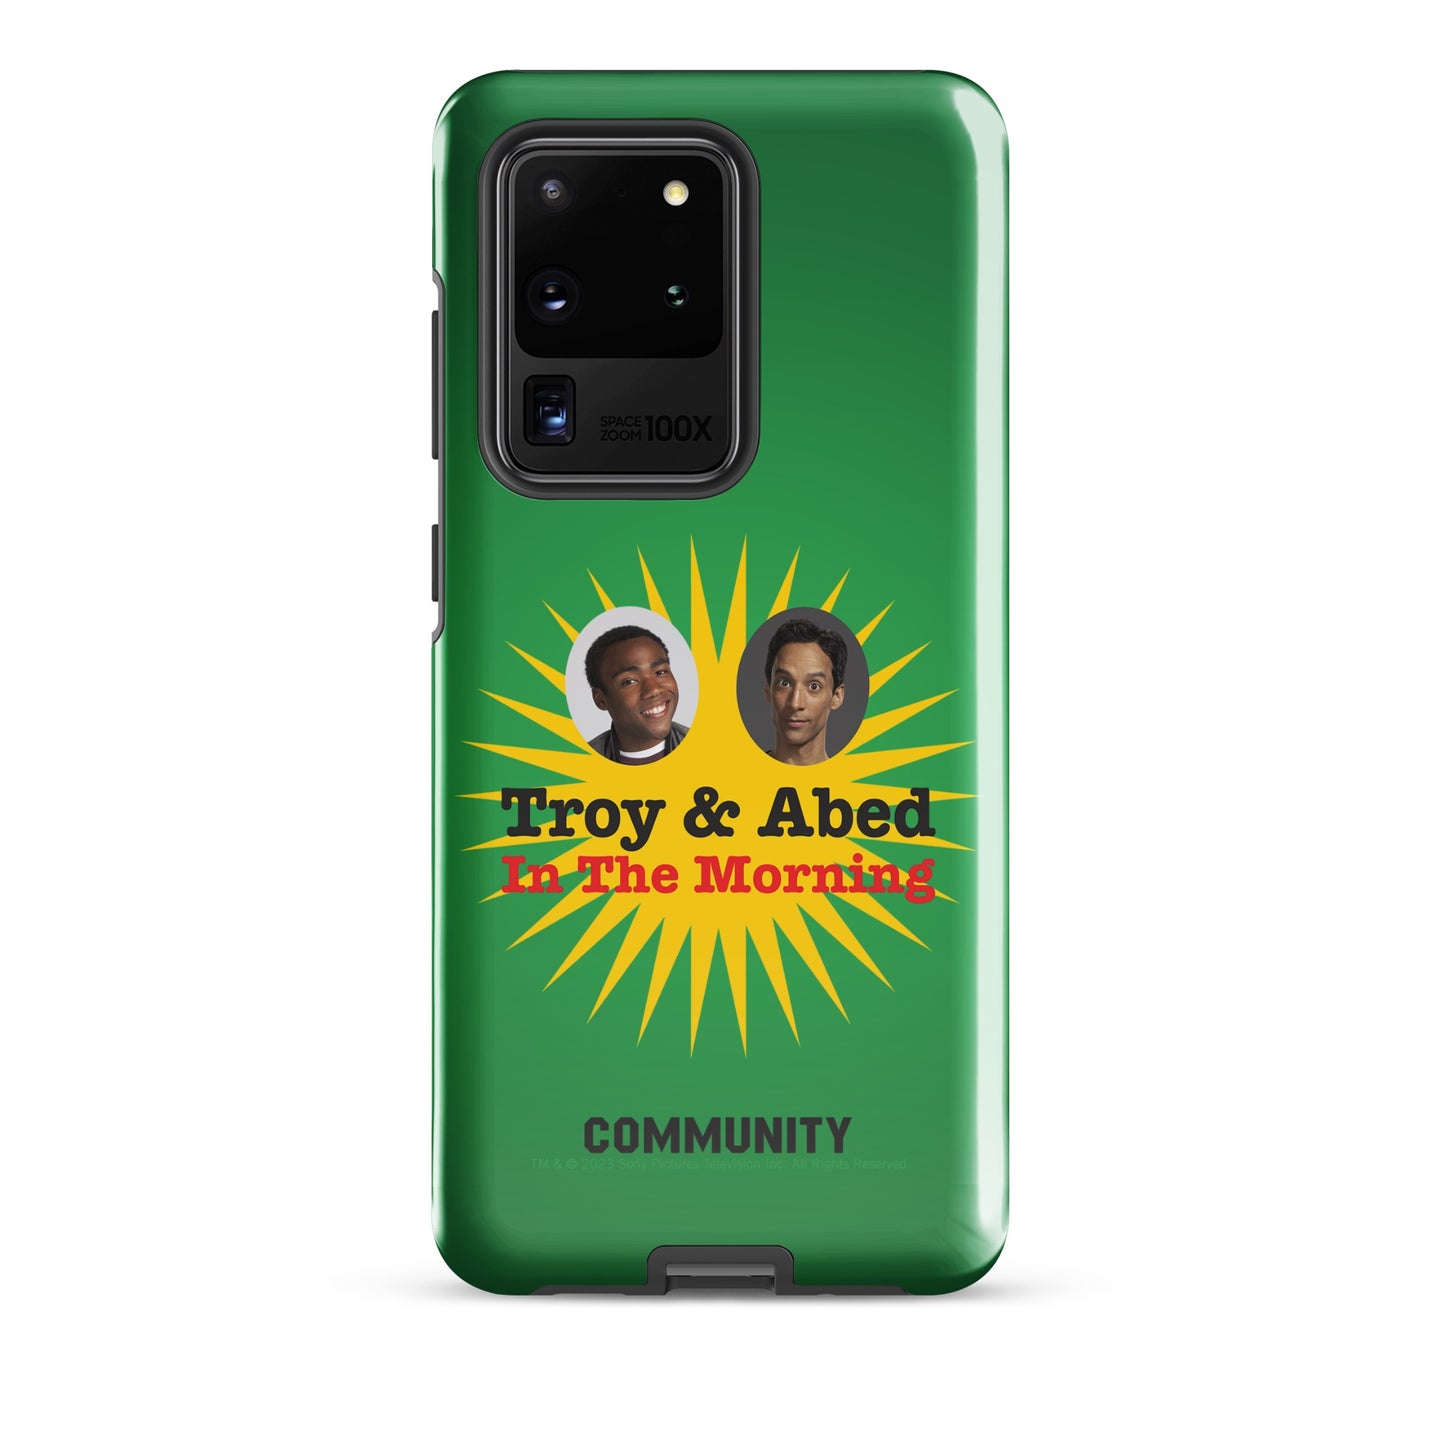 Community In the Morning Tough Phone Case - Samsung